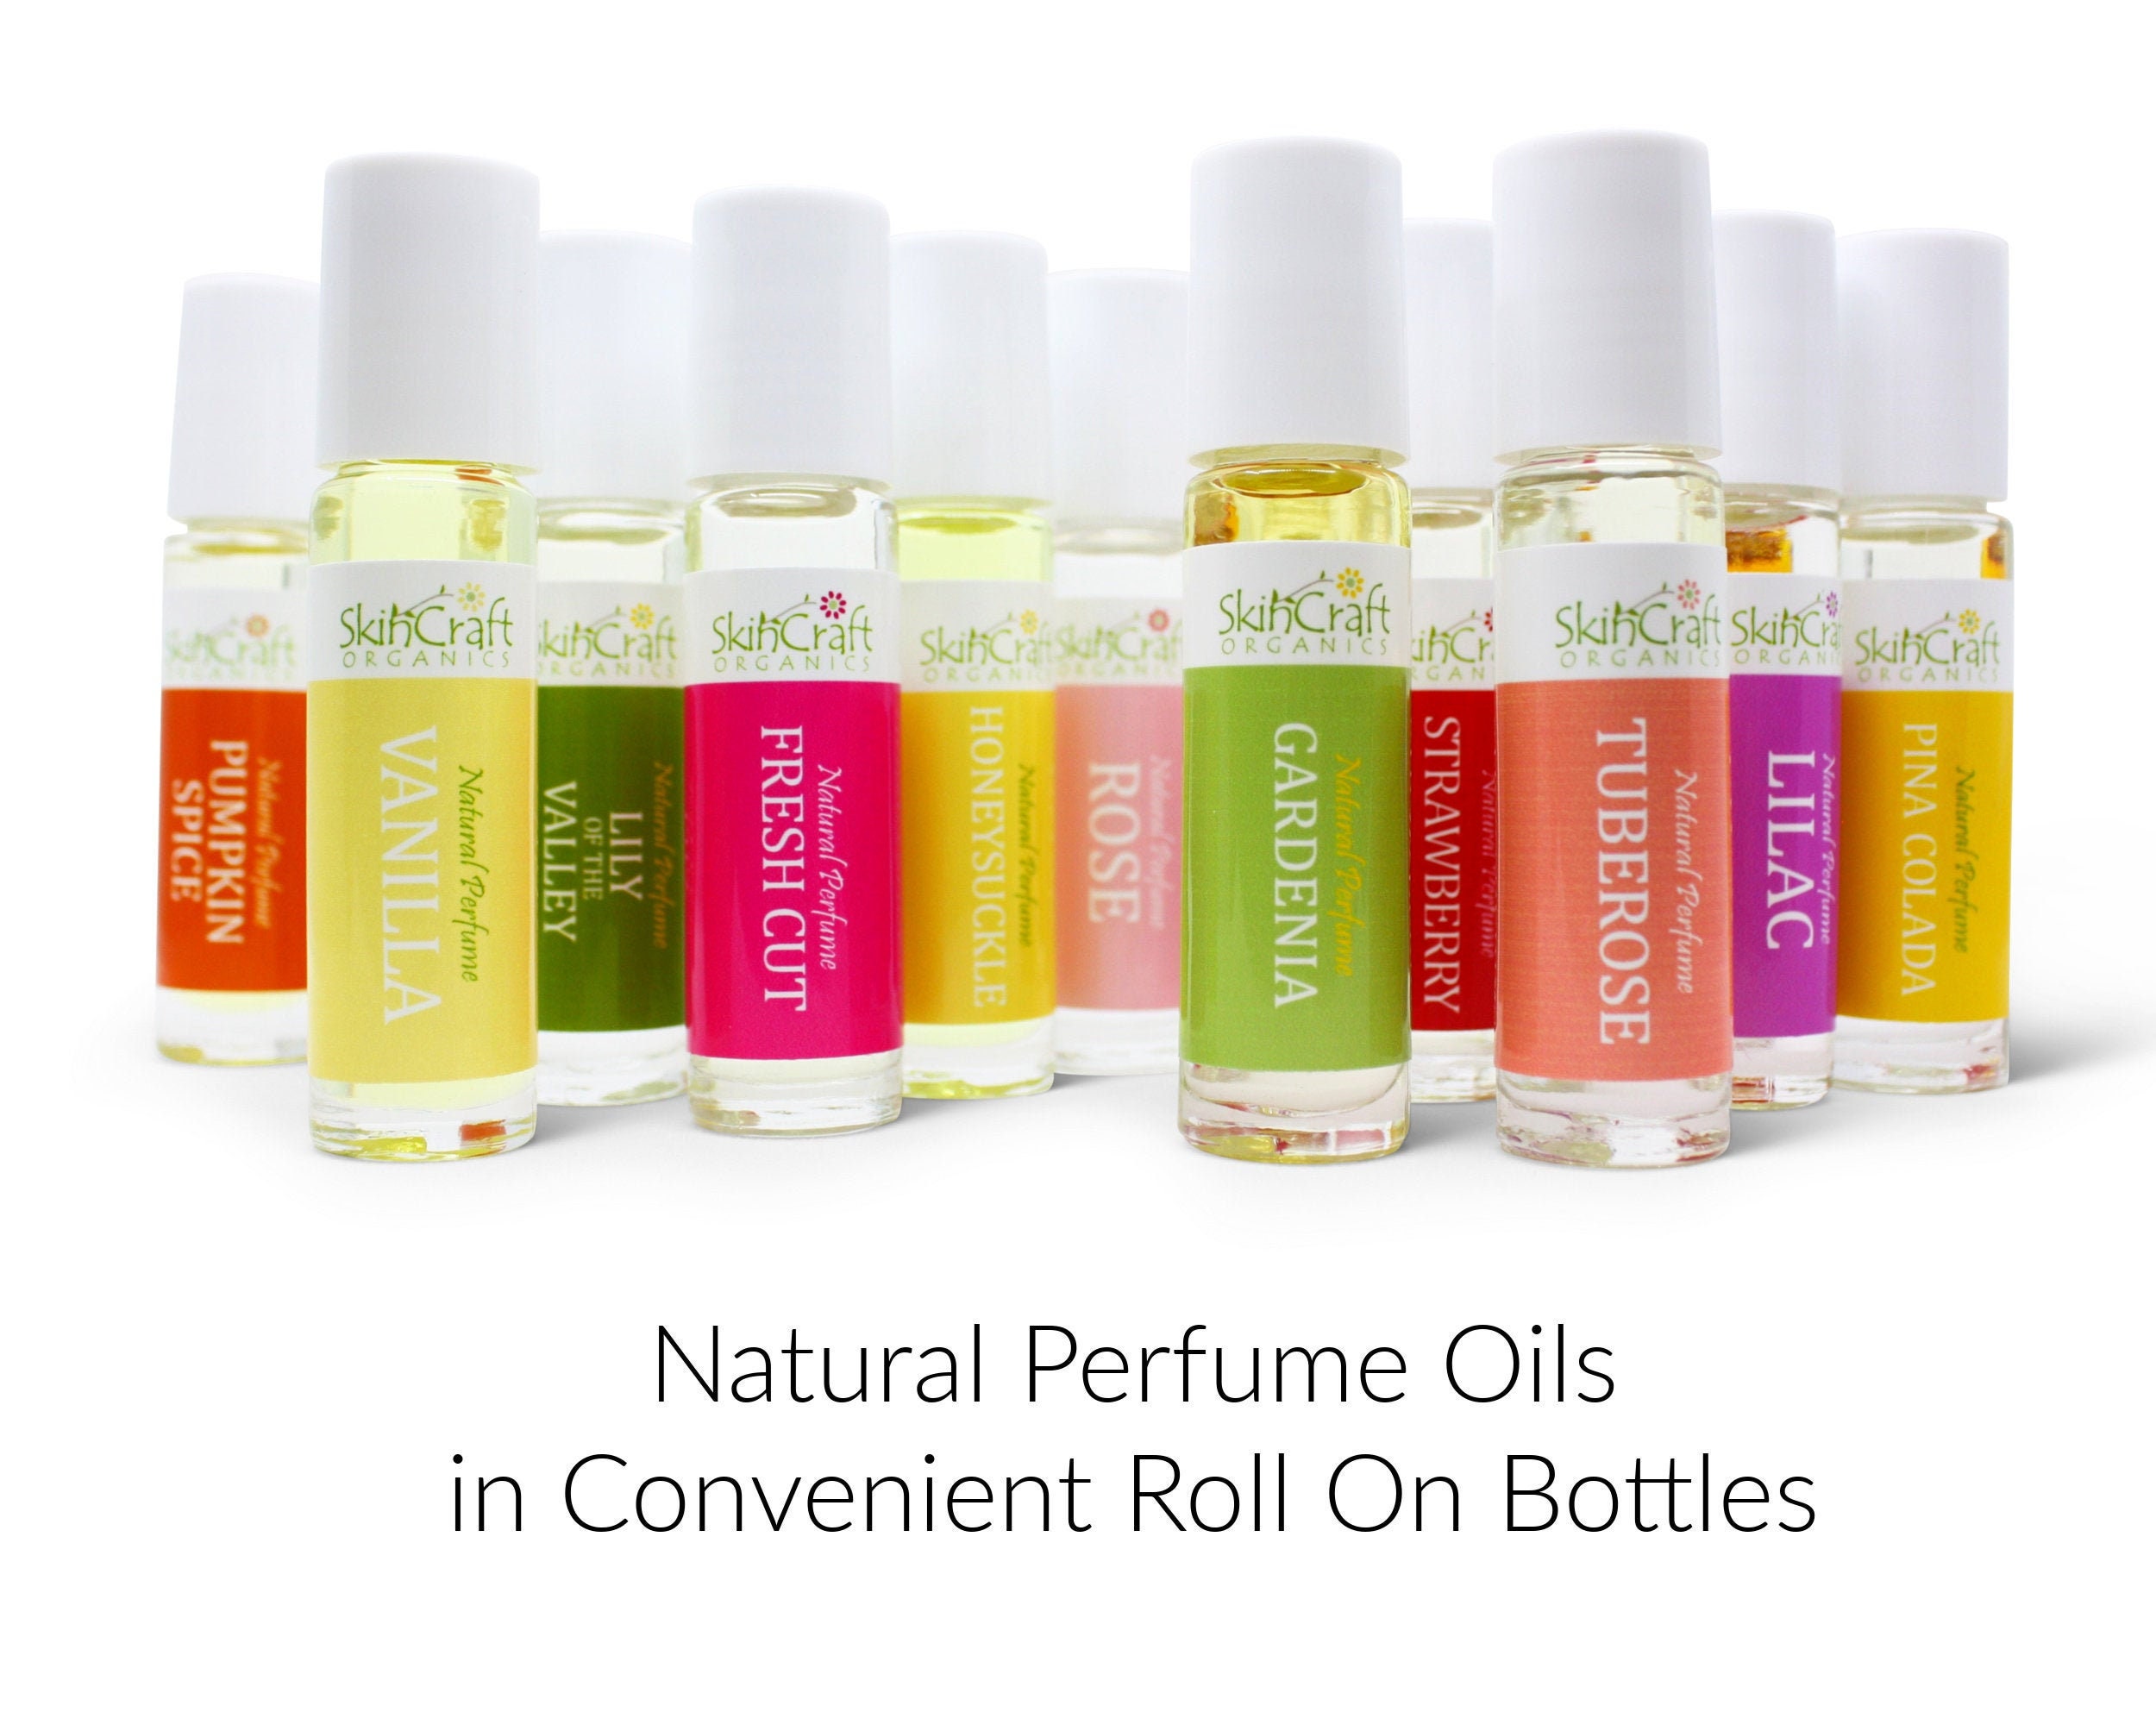 Body Oils, Roll-on Body Oils, Scented Oils, Fragrance Oils, Gift for  everyone, Unisex